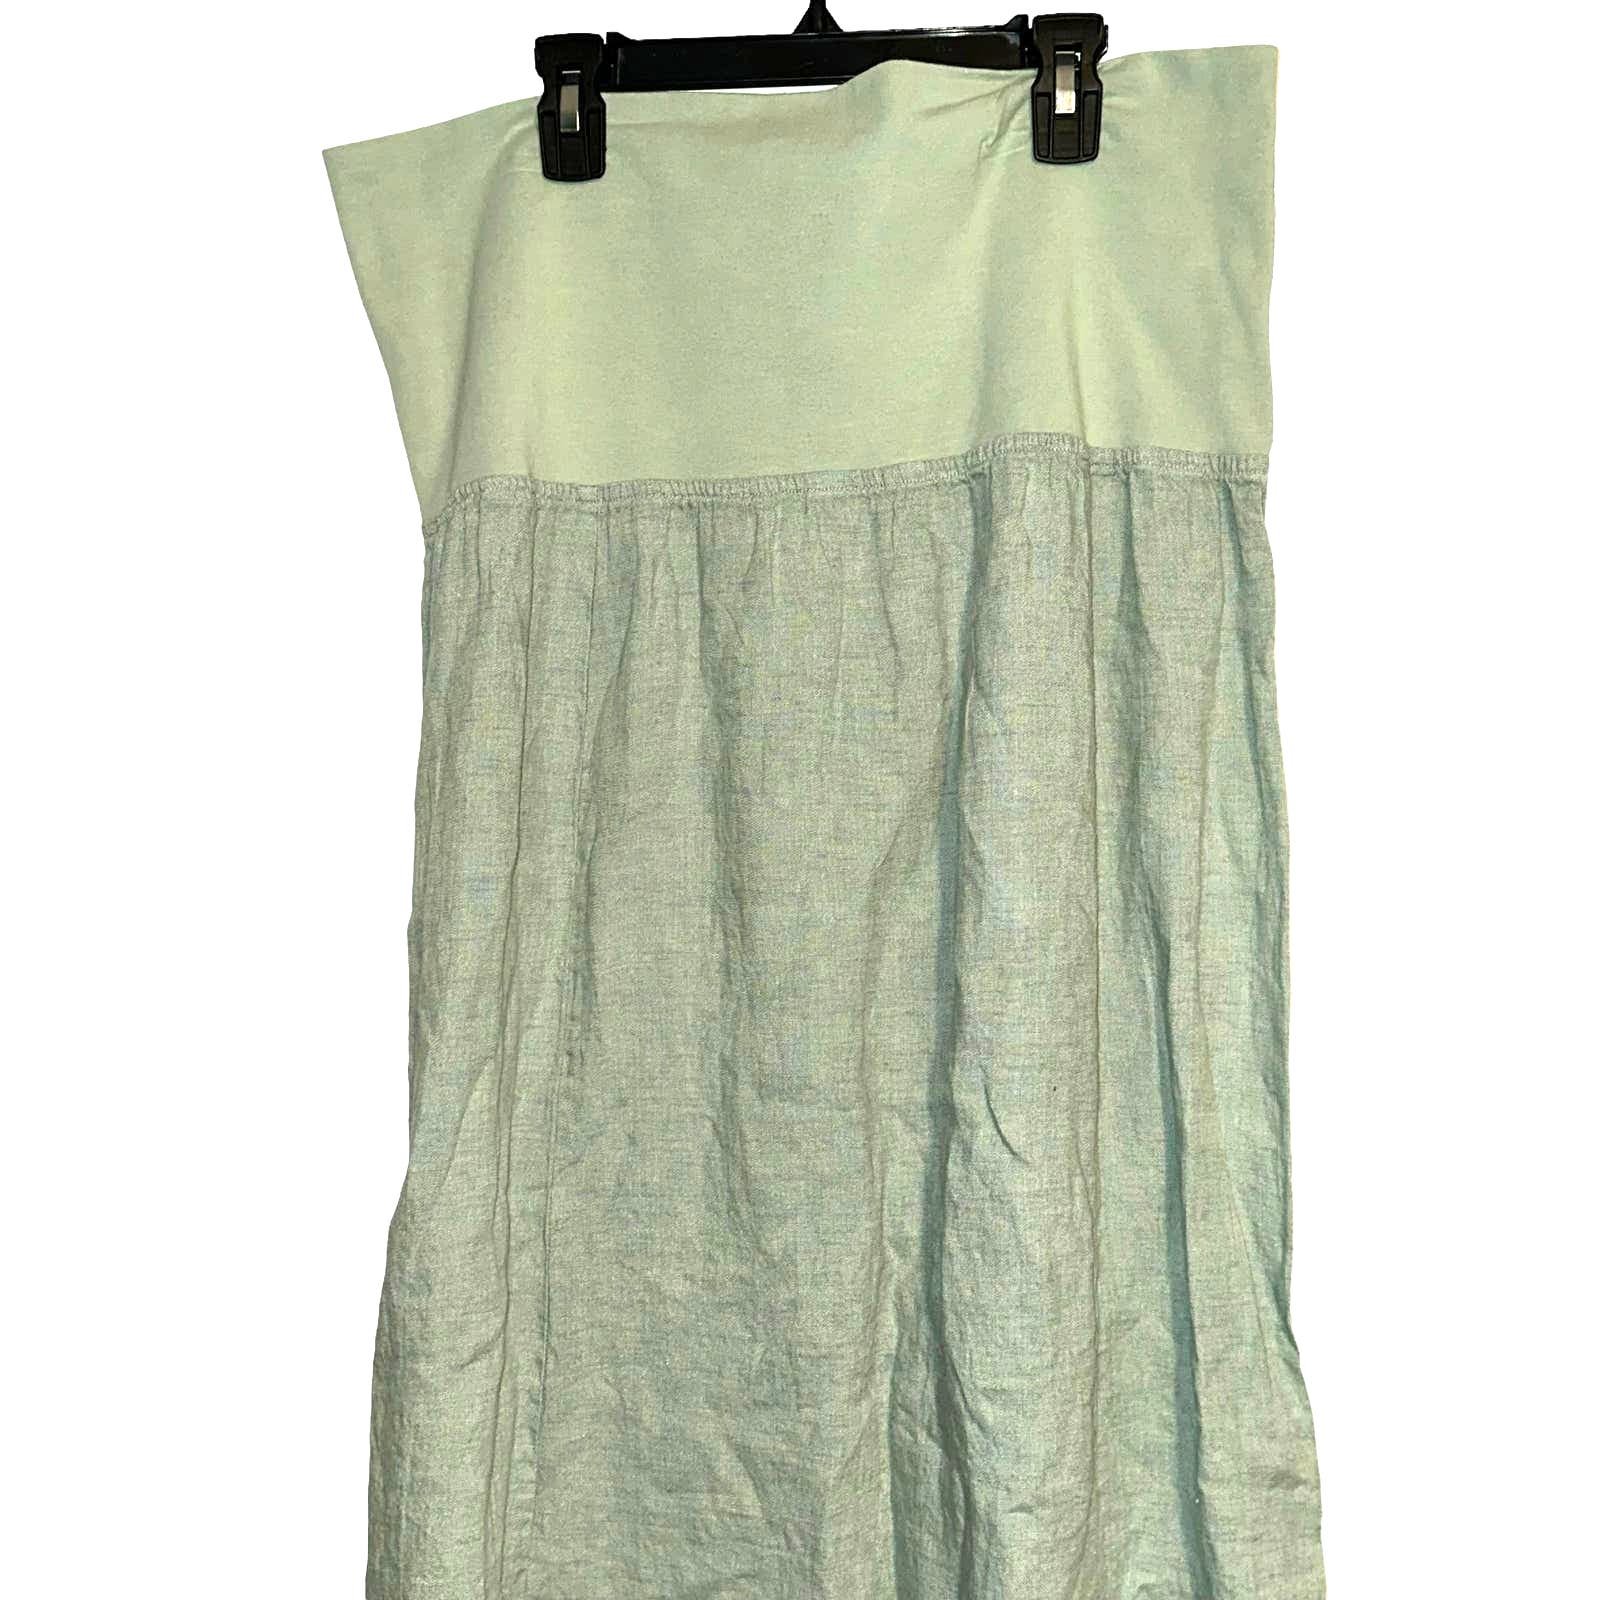 Nice Flax Linen Maxi Skirt Light Green Size Large PUll On GnFmiZf08 Store Online